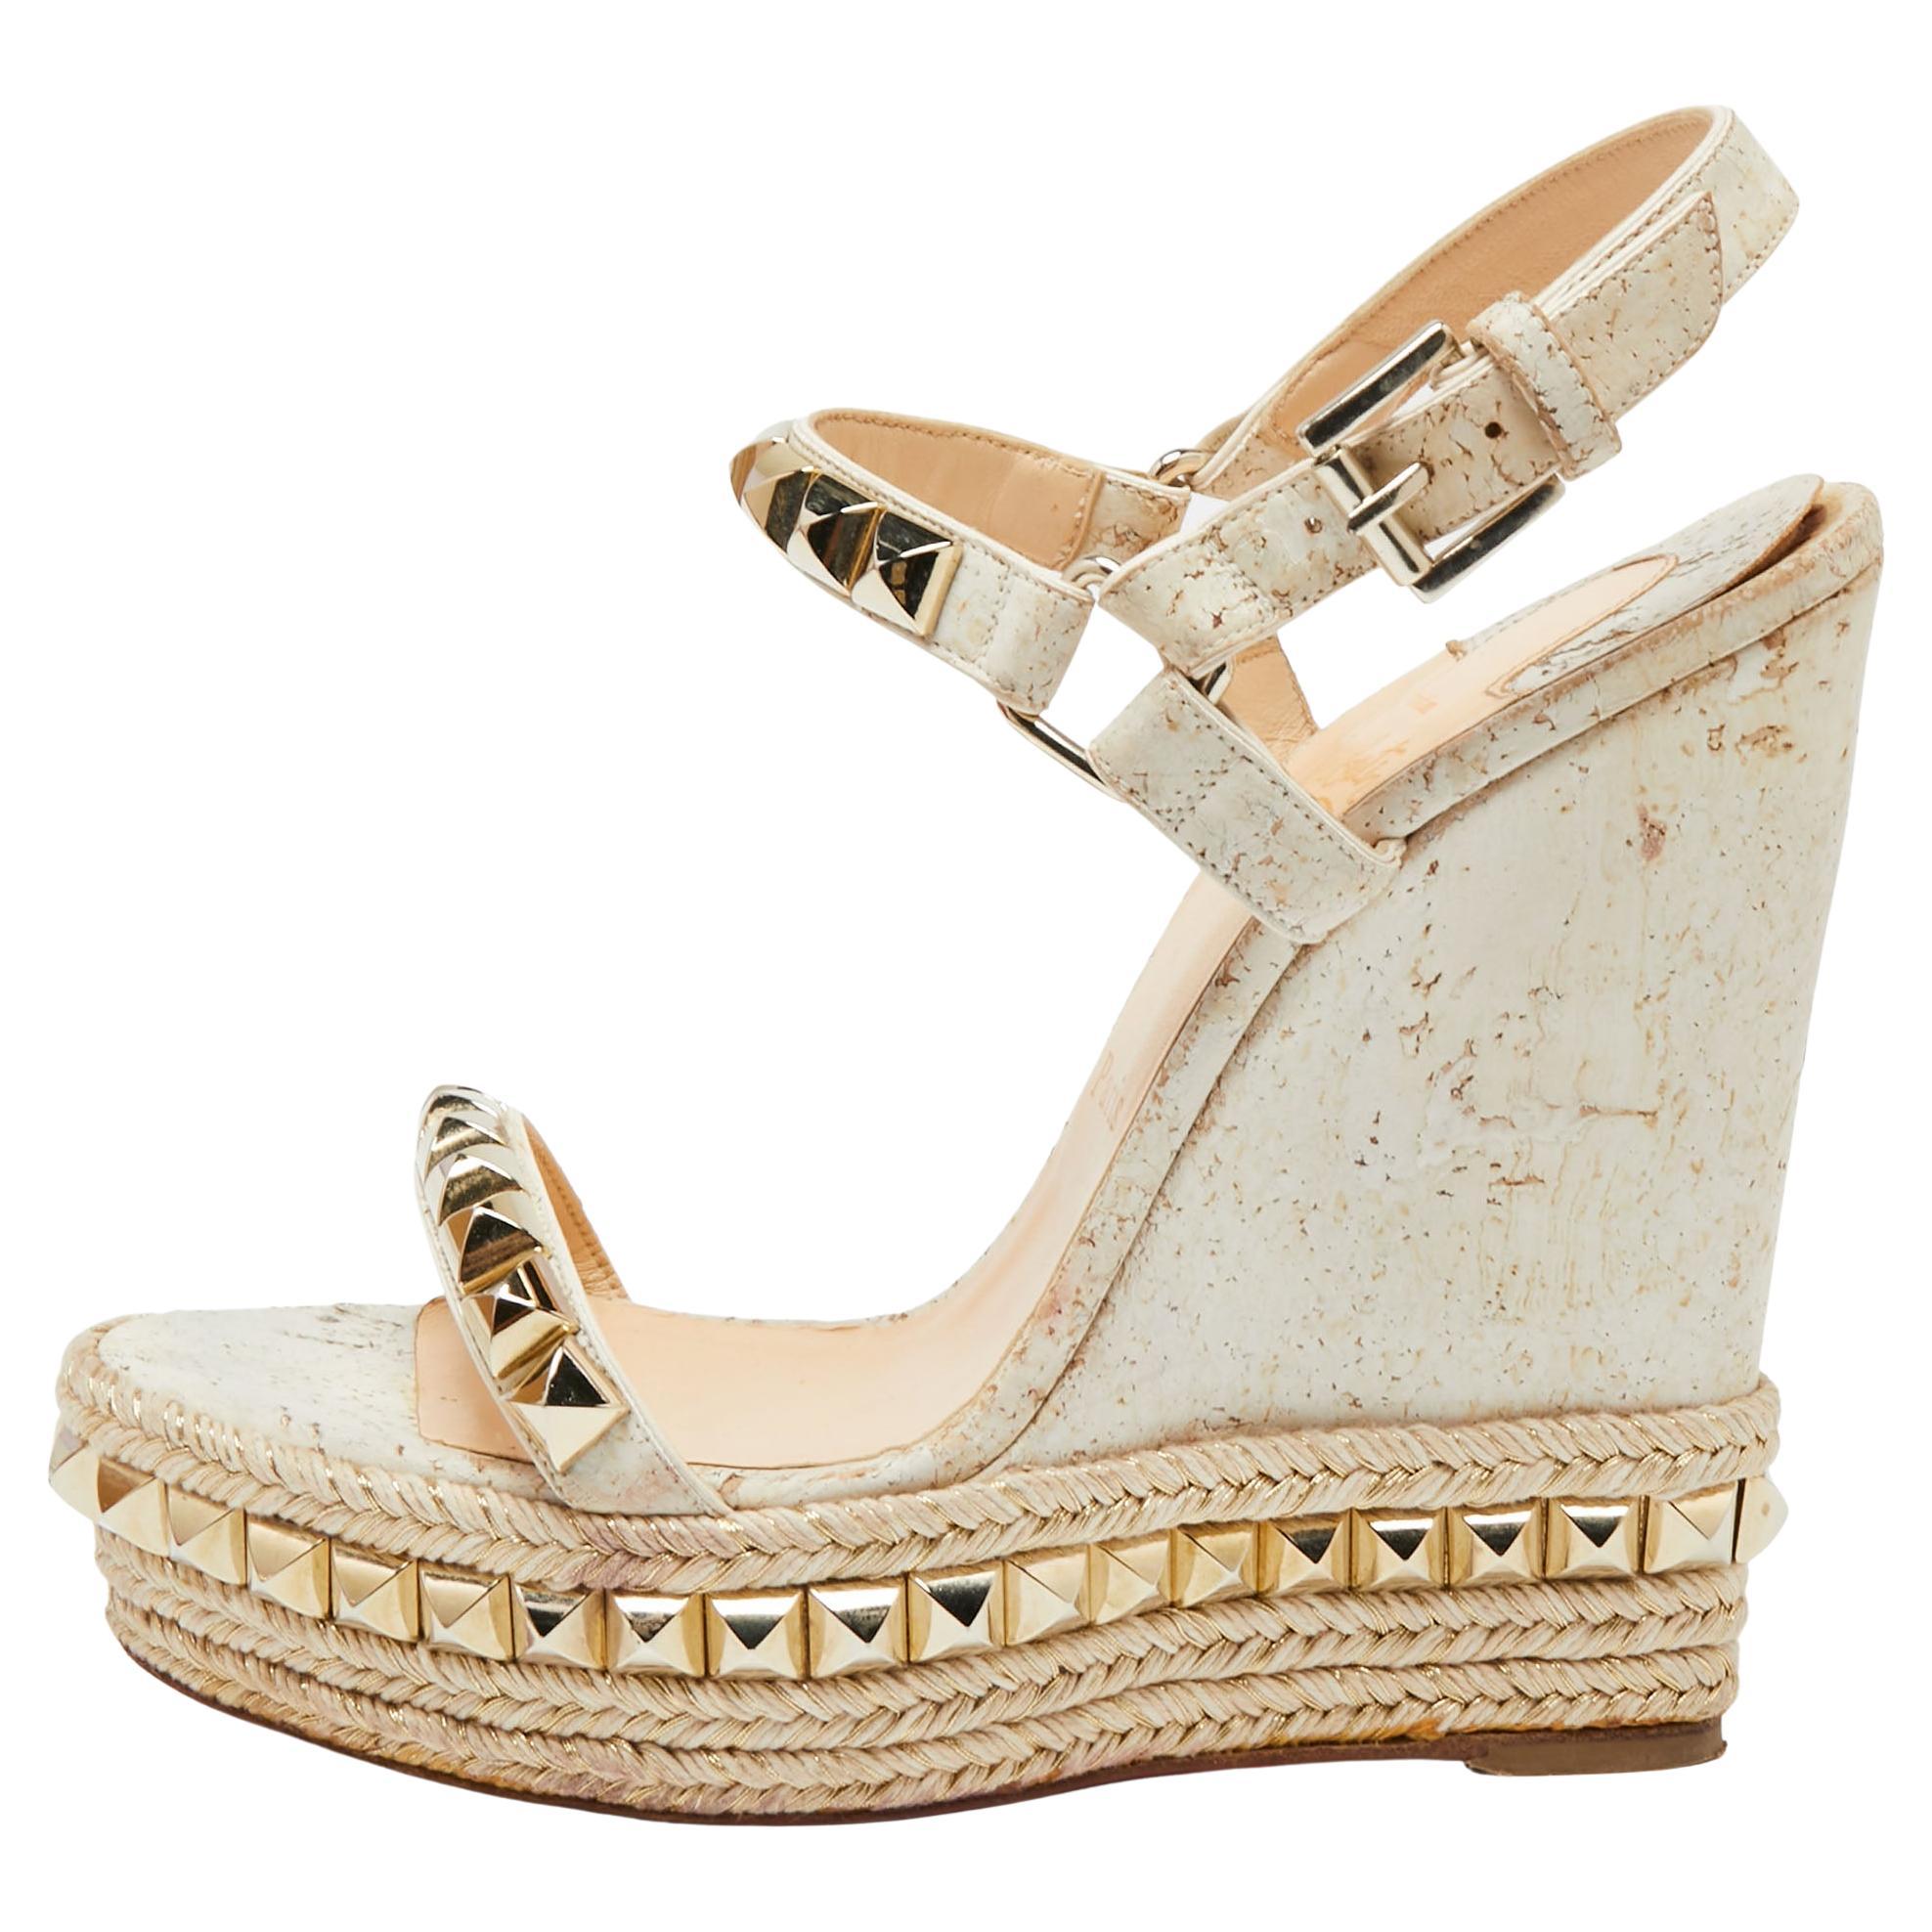 Christian Louboutin White/Light Gold Leather Cataclou Wedge Sandals Size 38